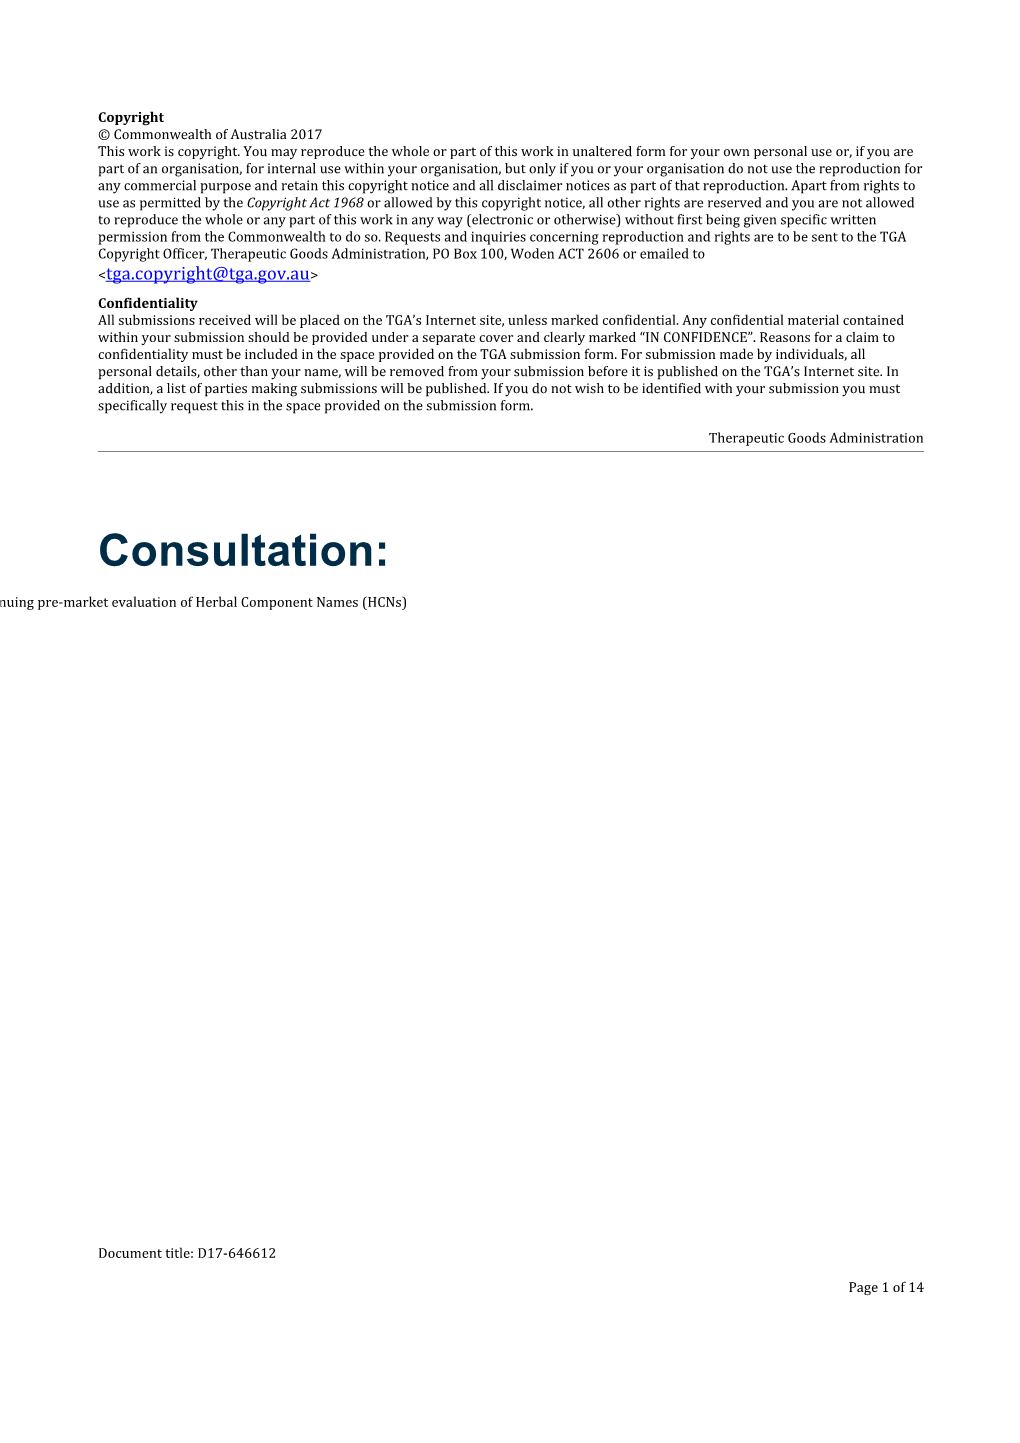 Consultation: Discontinuing Pre-Market Evaluation of Herbal Component Names (Hcns)